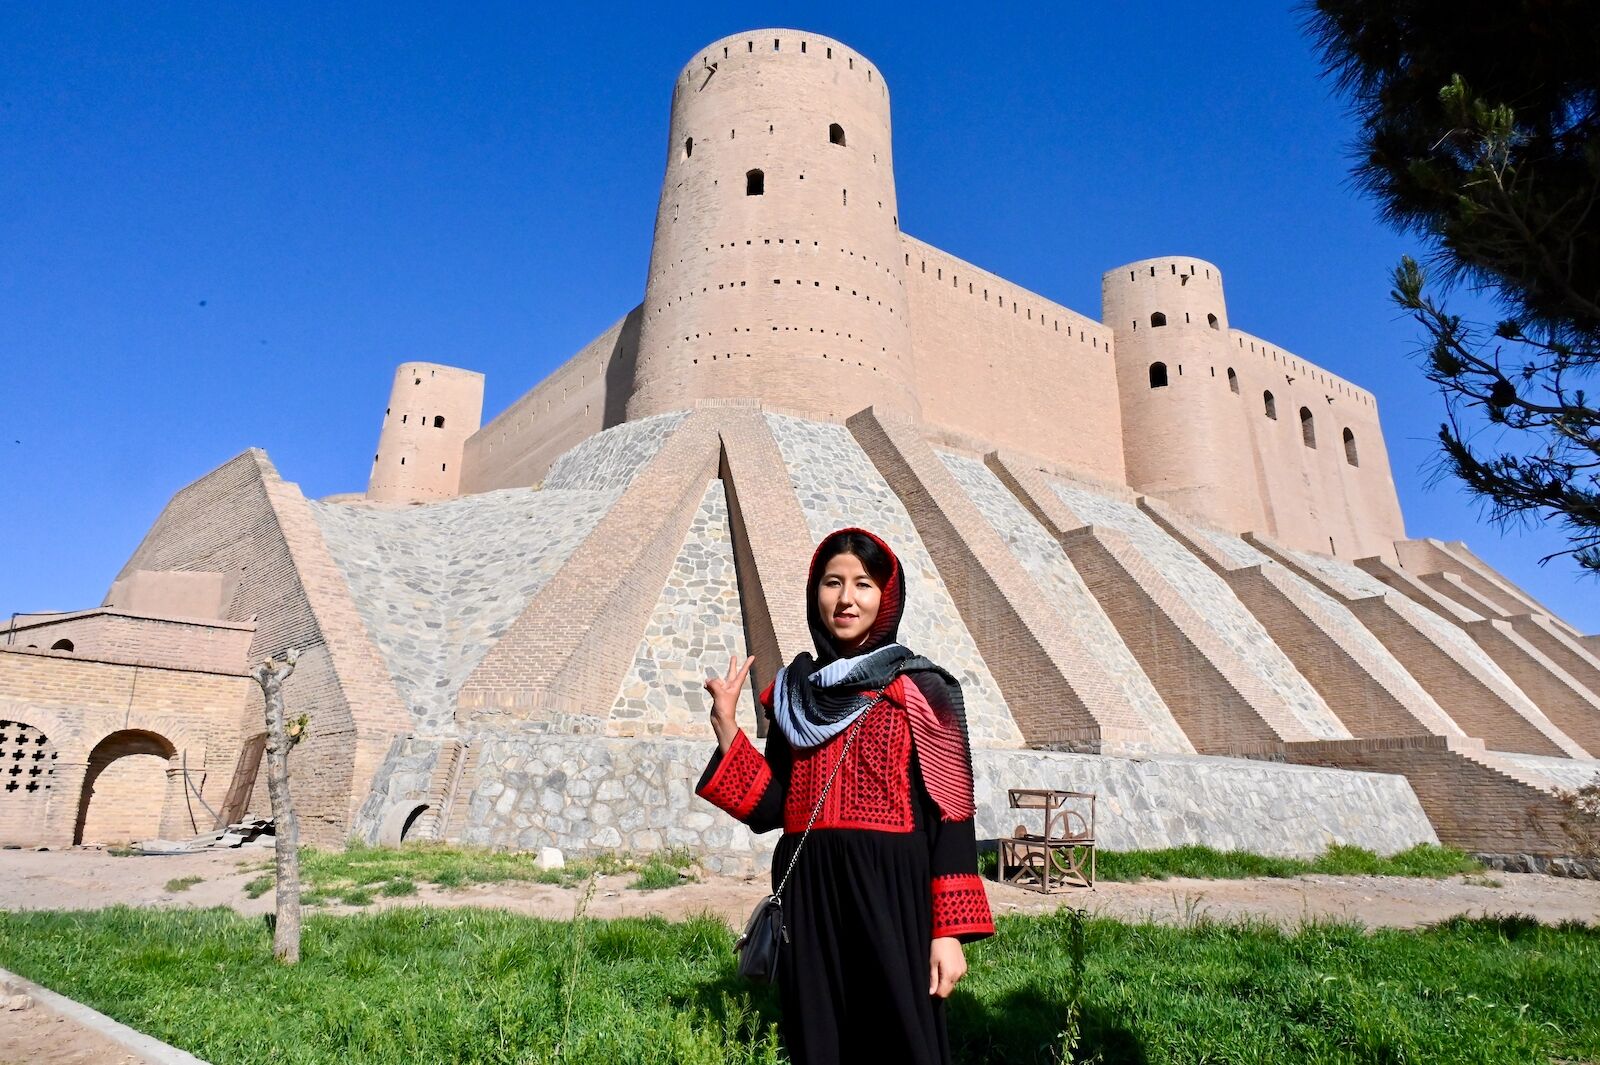 Fatima Haidari, Afghanistan’s first female tour guide poses at an historical site